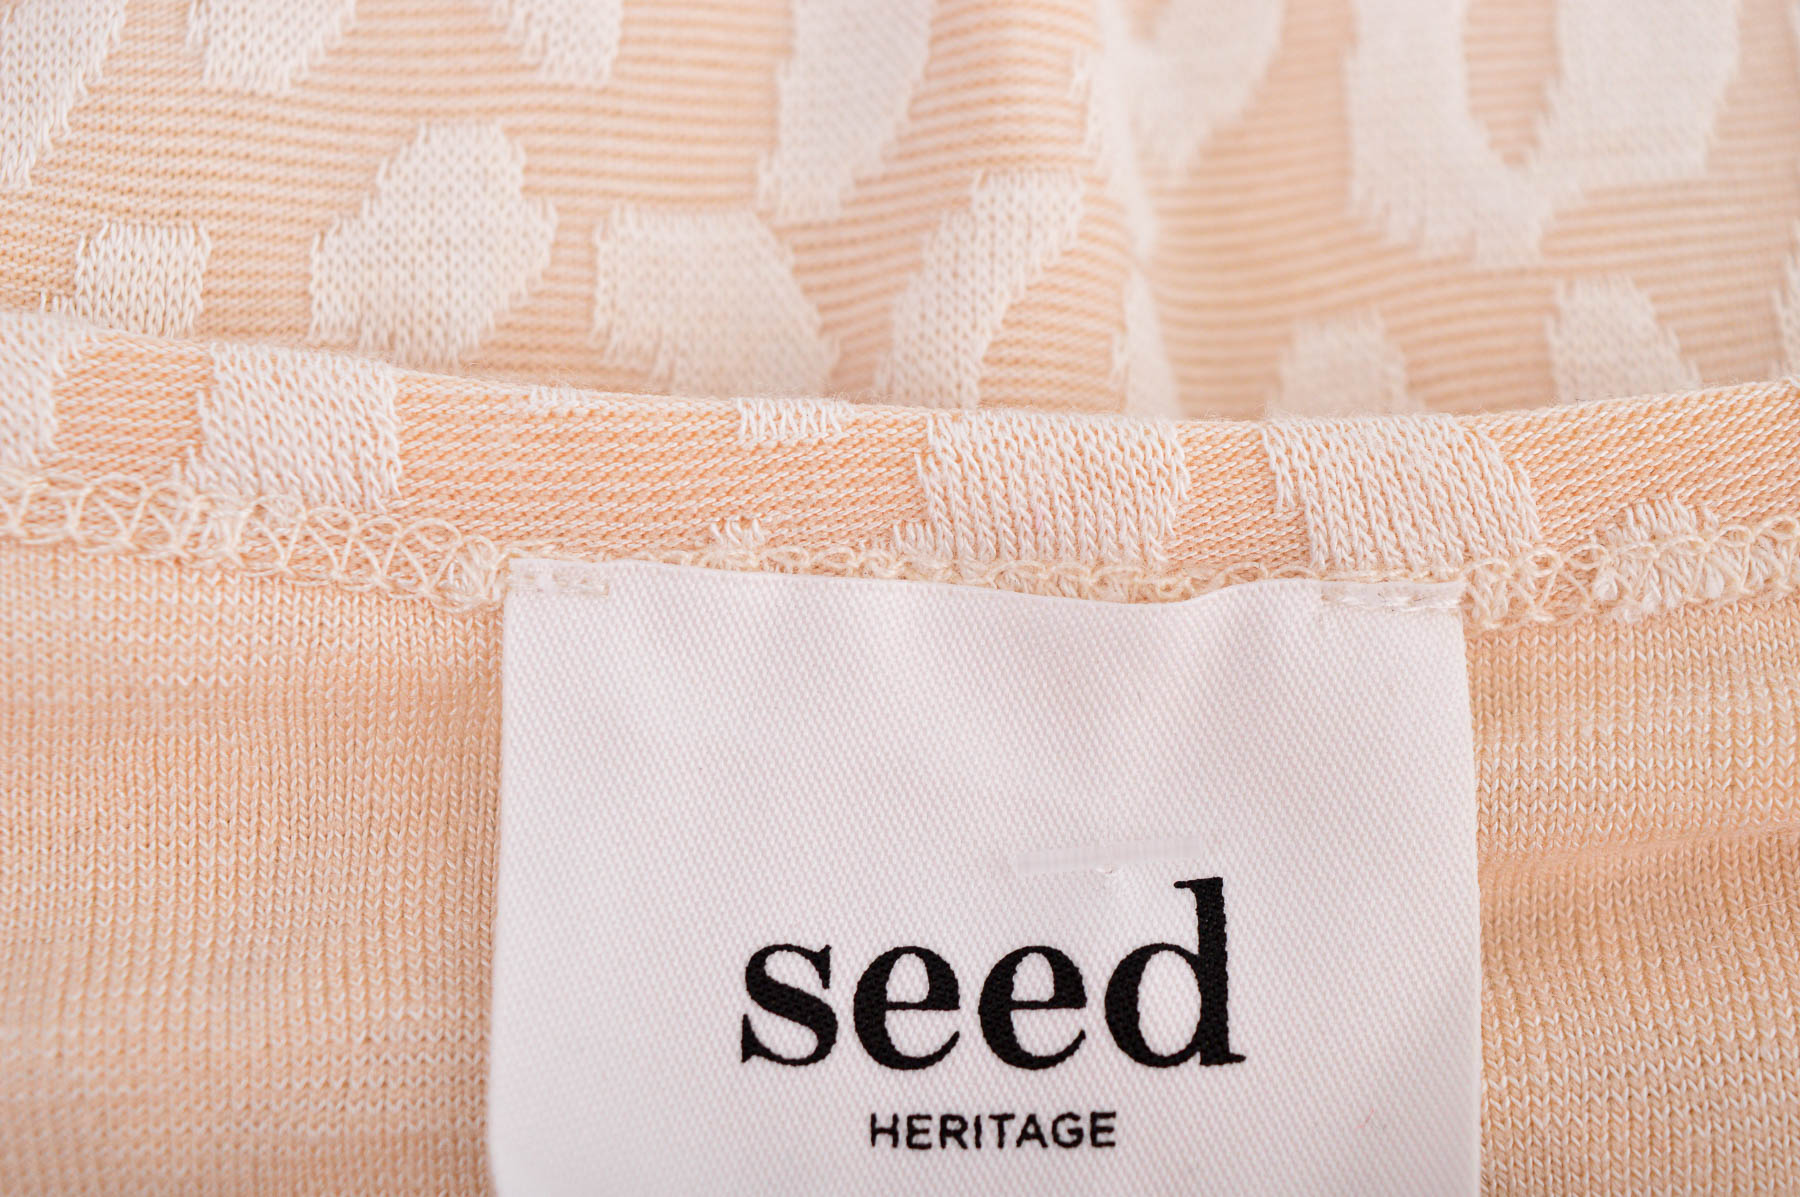 Women's blouse - SEED Heritage - 2